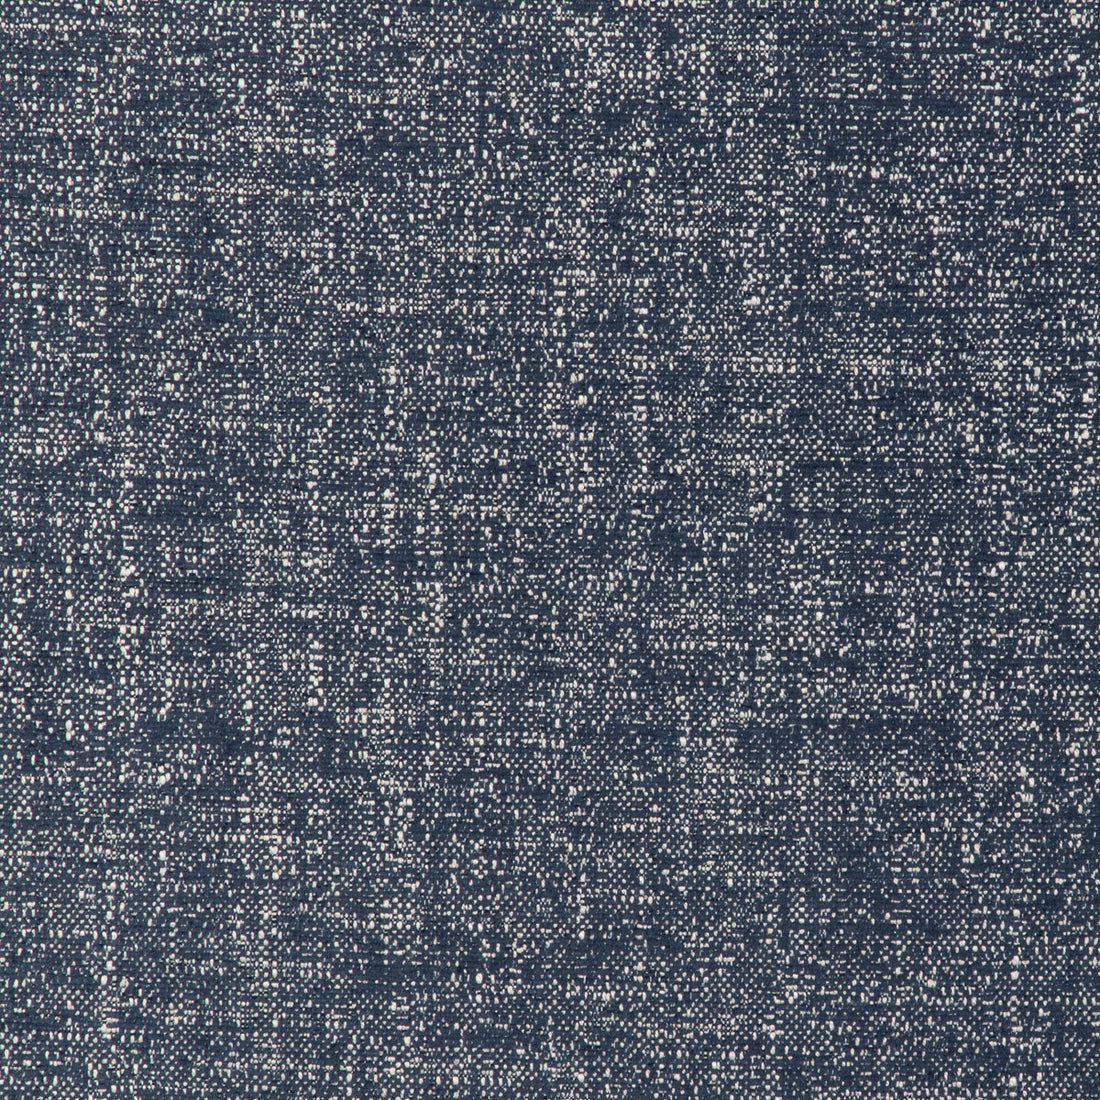 Kravet Design fabric in 36951-50 color - pattern 36951.50.0 - by Kravet Design in the Sustainable Textures II collection